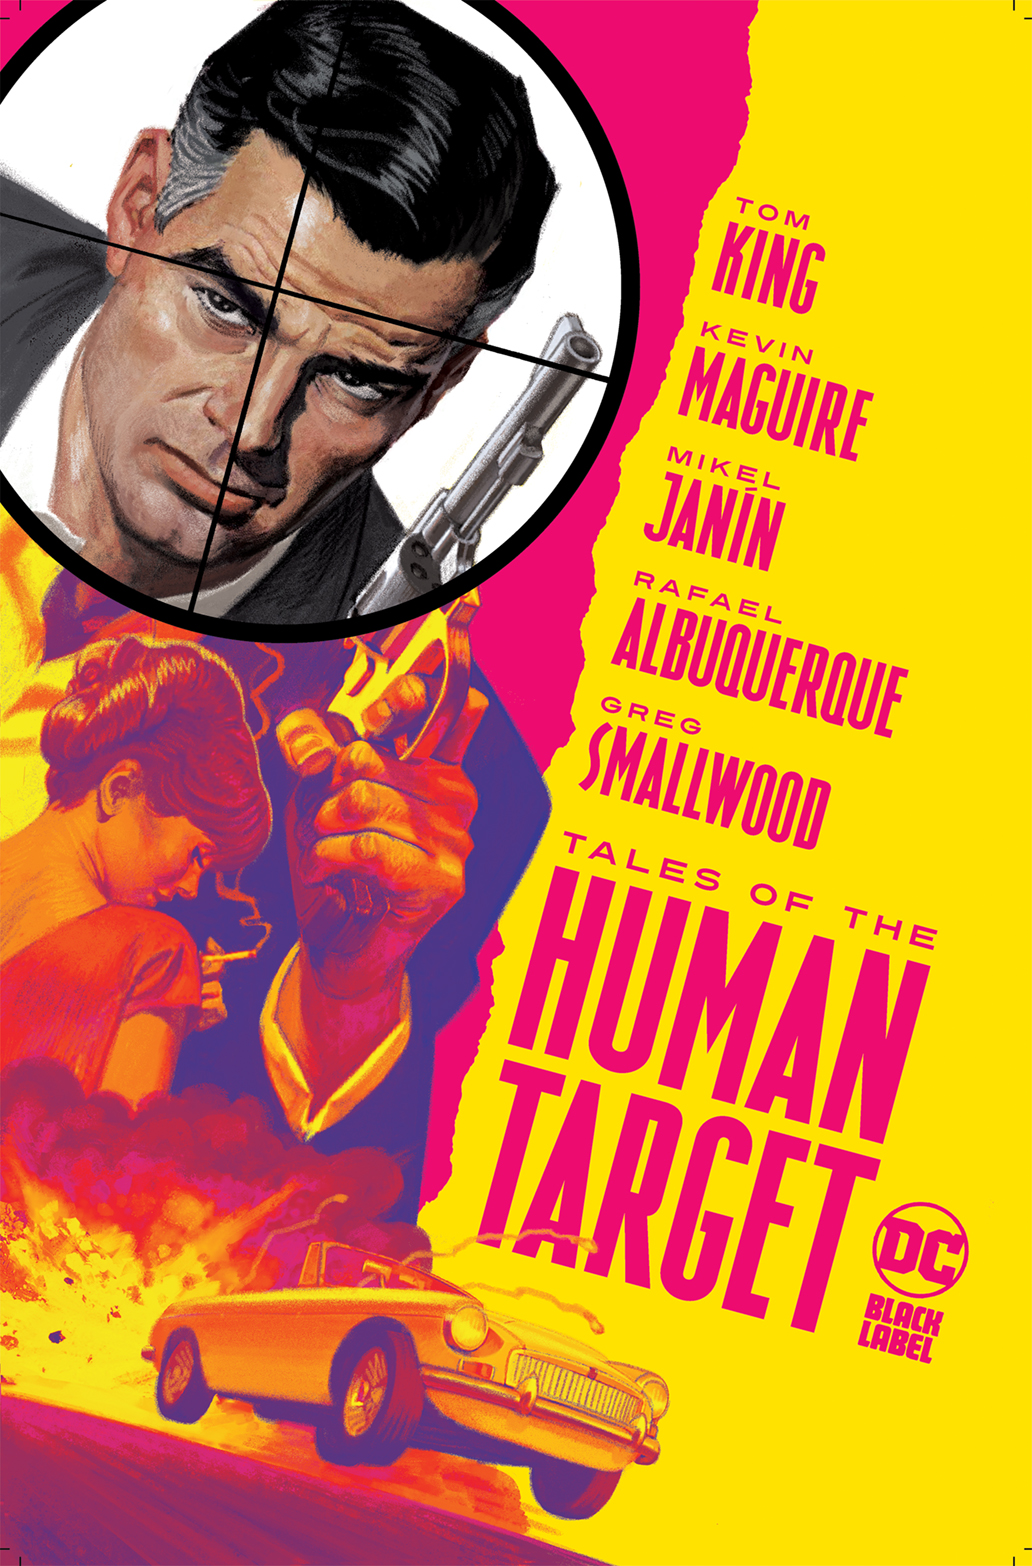 Tales of the Human Target #1 (One Shot) Cover A Greg Smallwood (Mature)